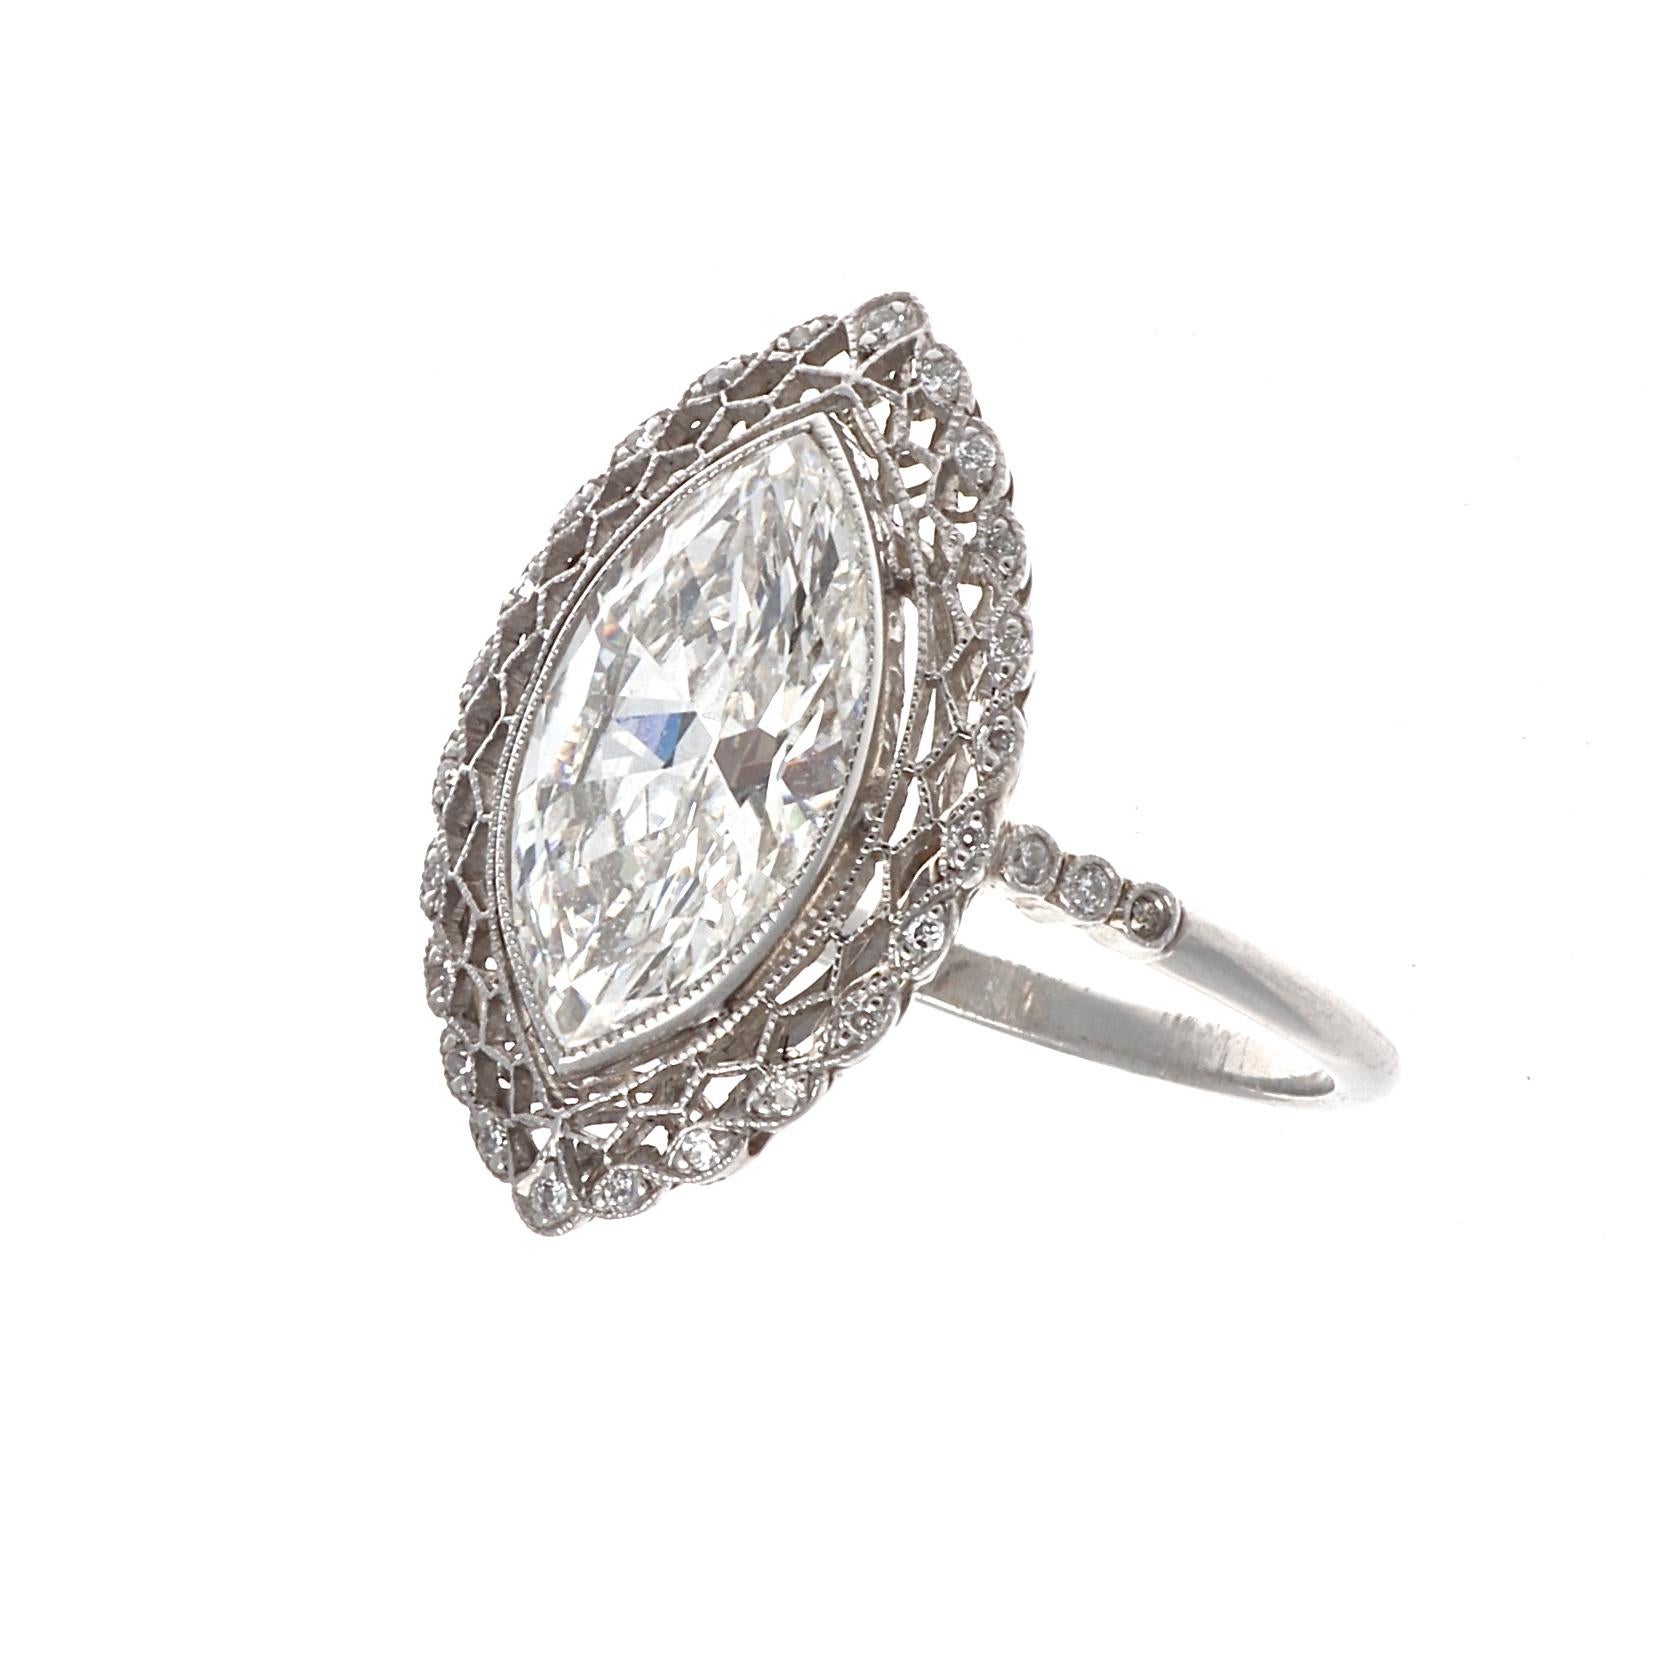 A tradition that dates back to the early Egyptians. A circle for eternal love and worn on what is now known as your ring finger because they believed this vein ran directly to your heart. Featuring a GIA certified 2.39 carat marquise cut diamond